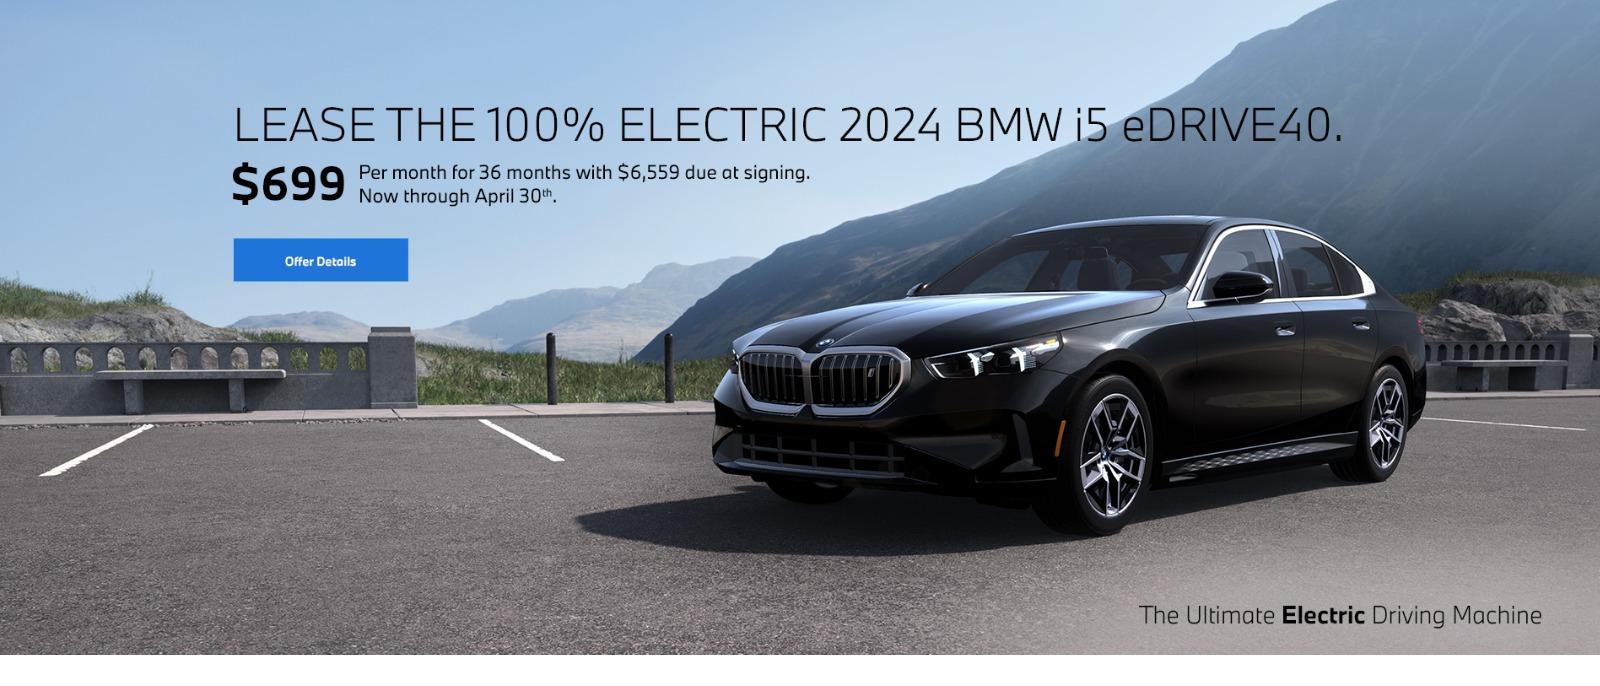 2024 BMW i5 eDrive40 $699 per month for 36 months